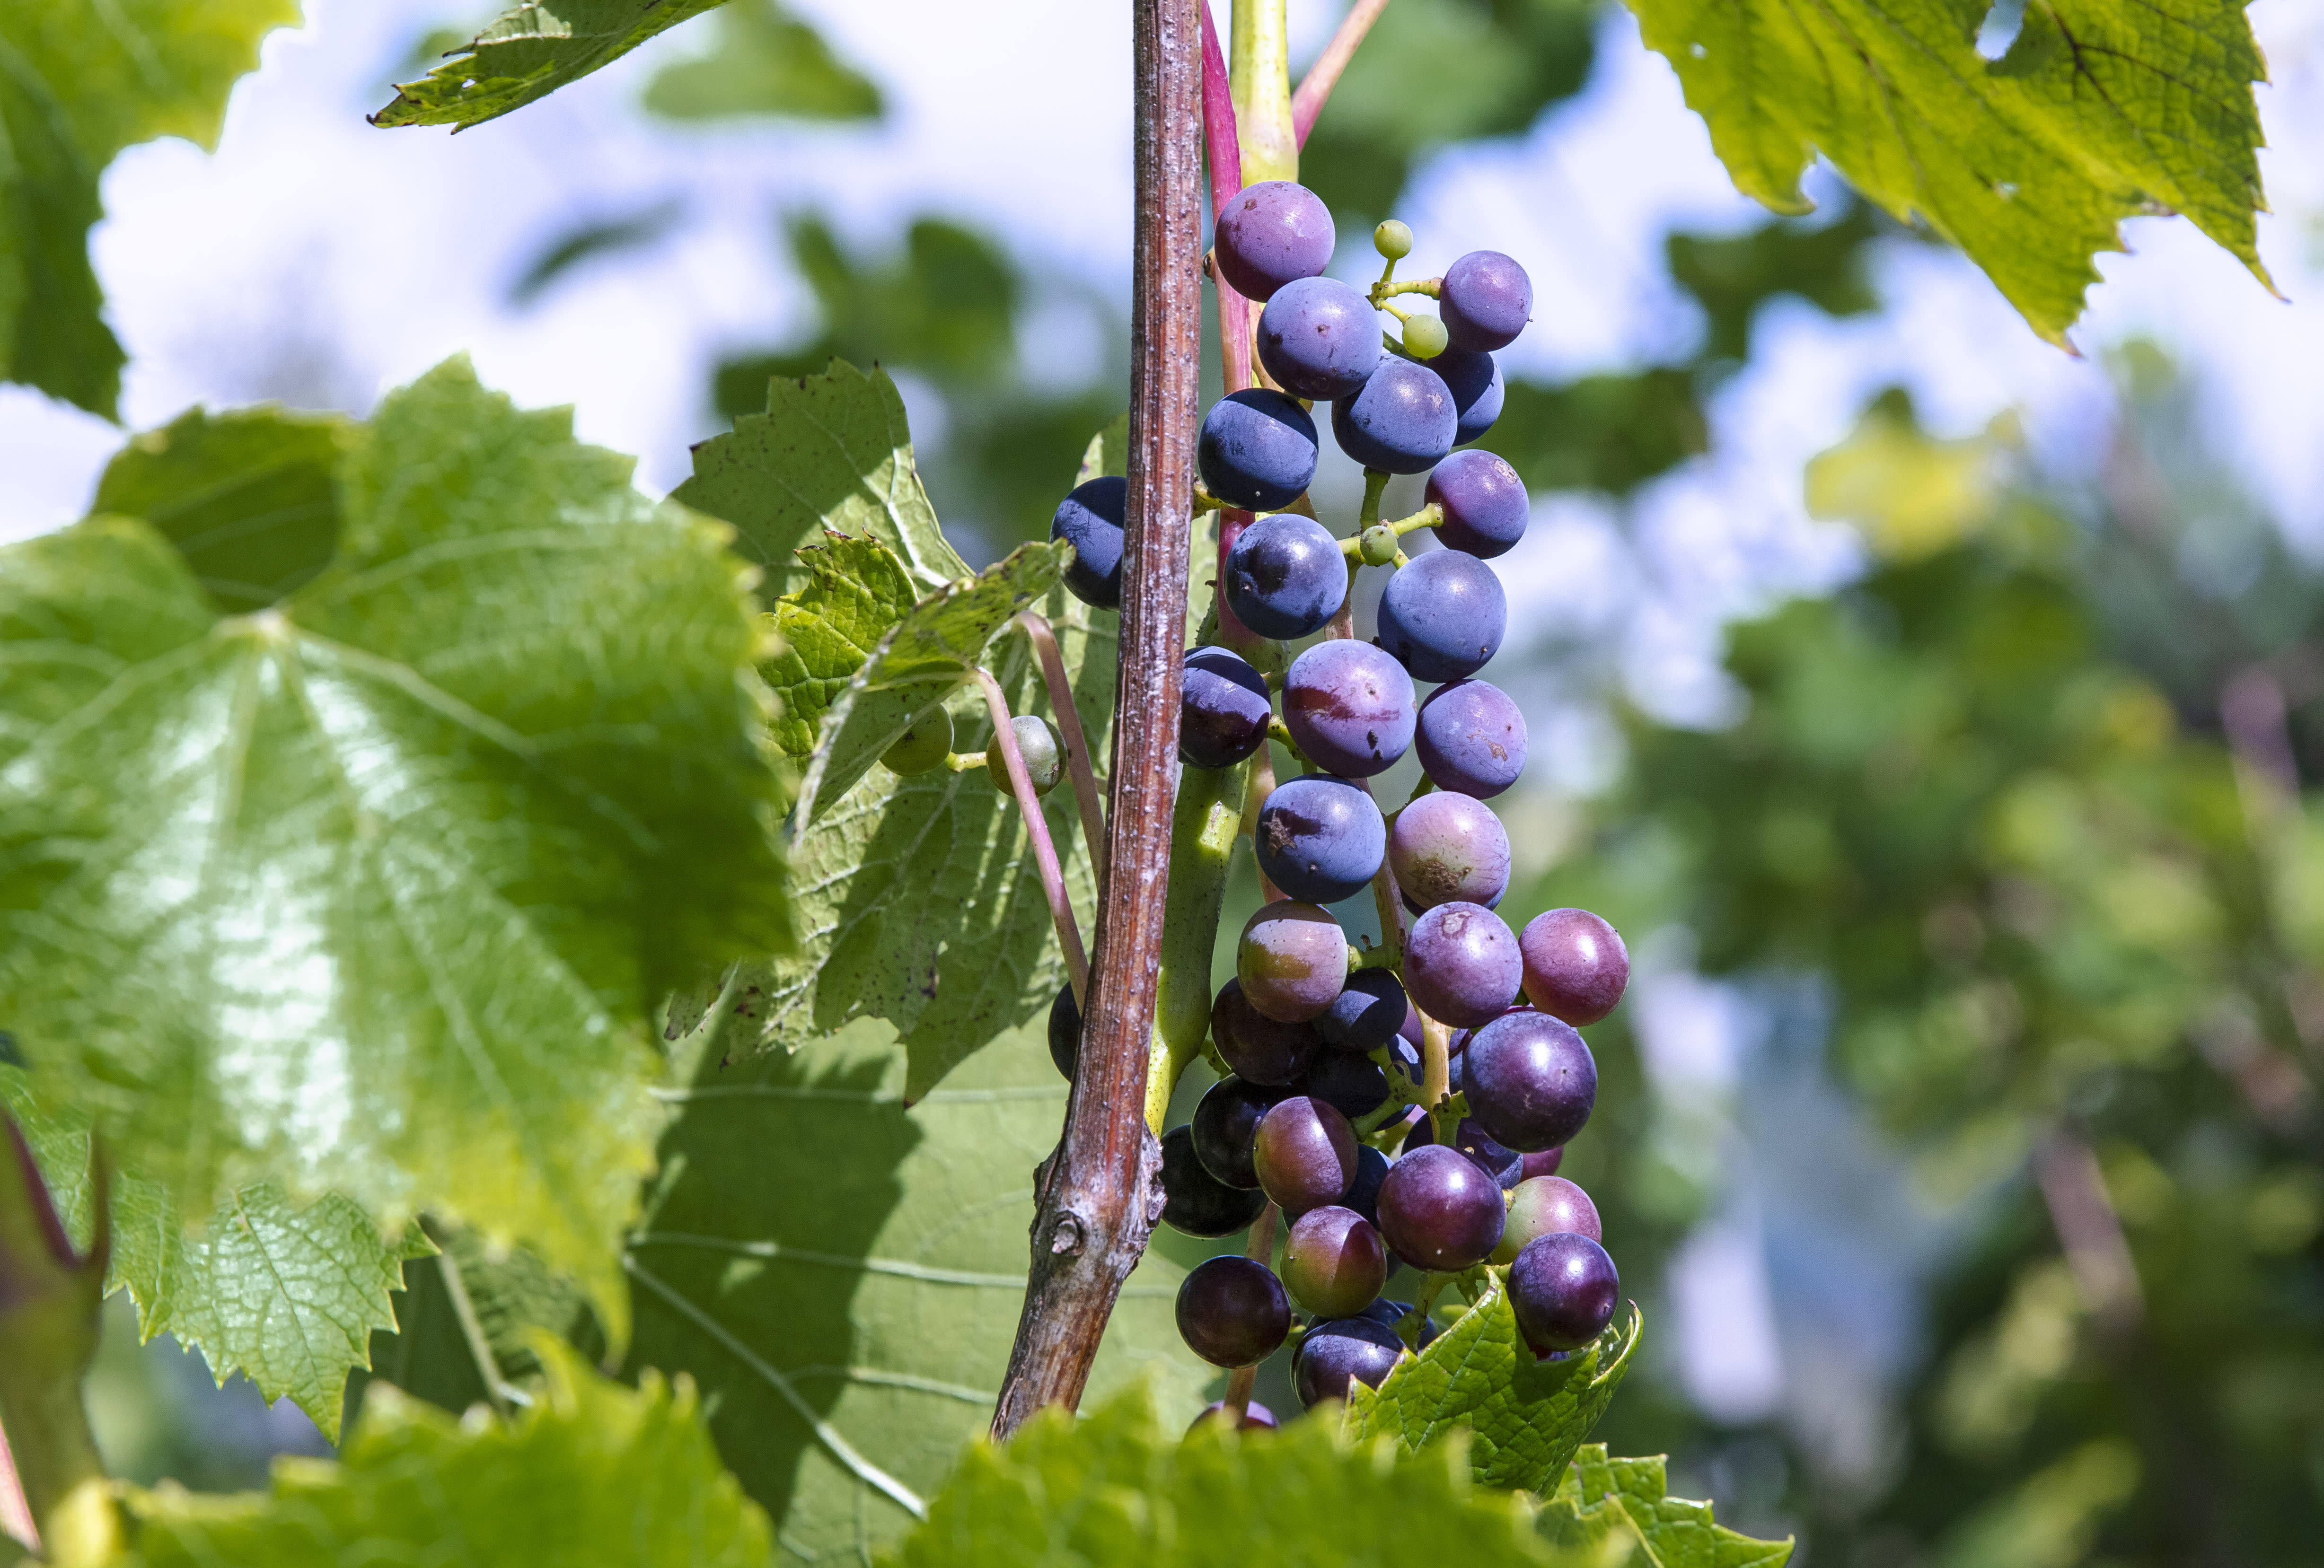 Finland could seek EU recognition as a wine-producing country by 2028